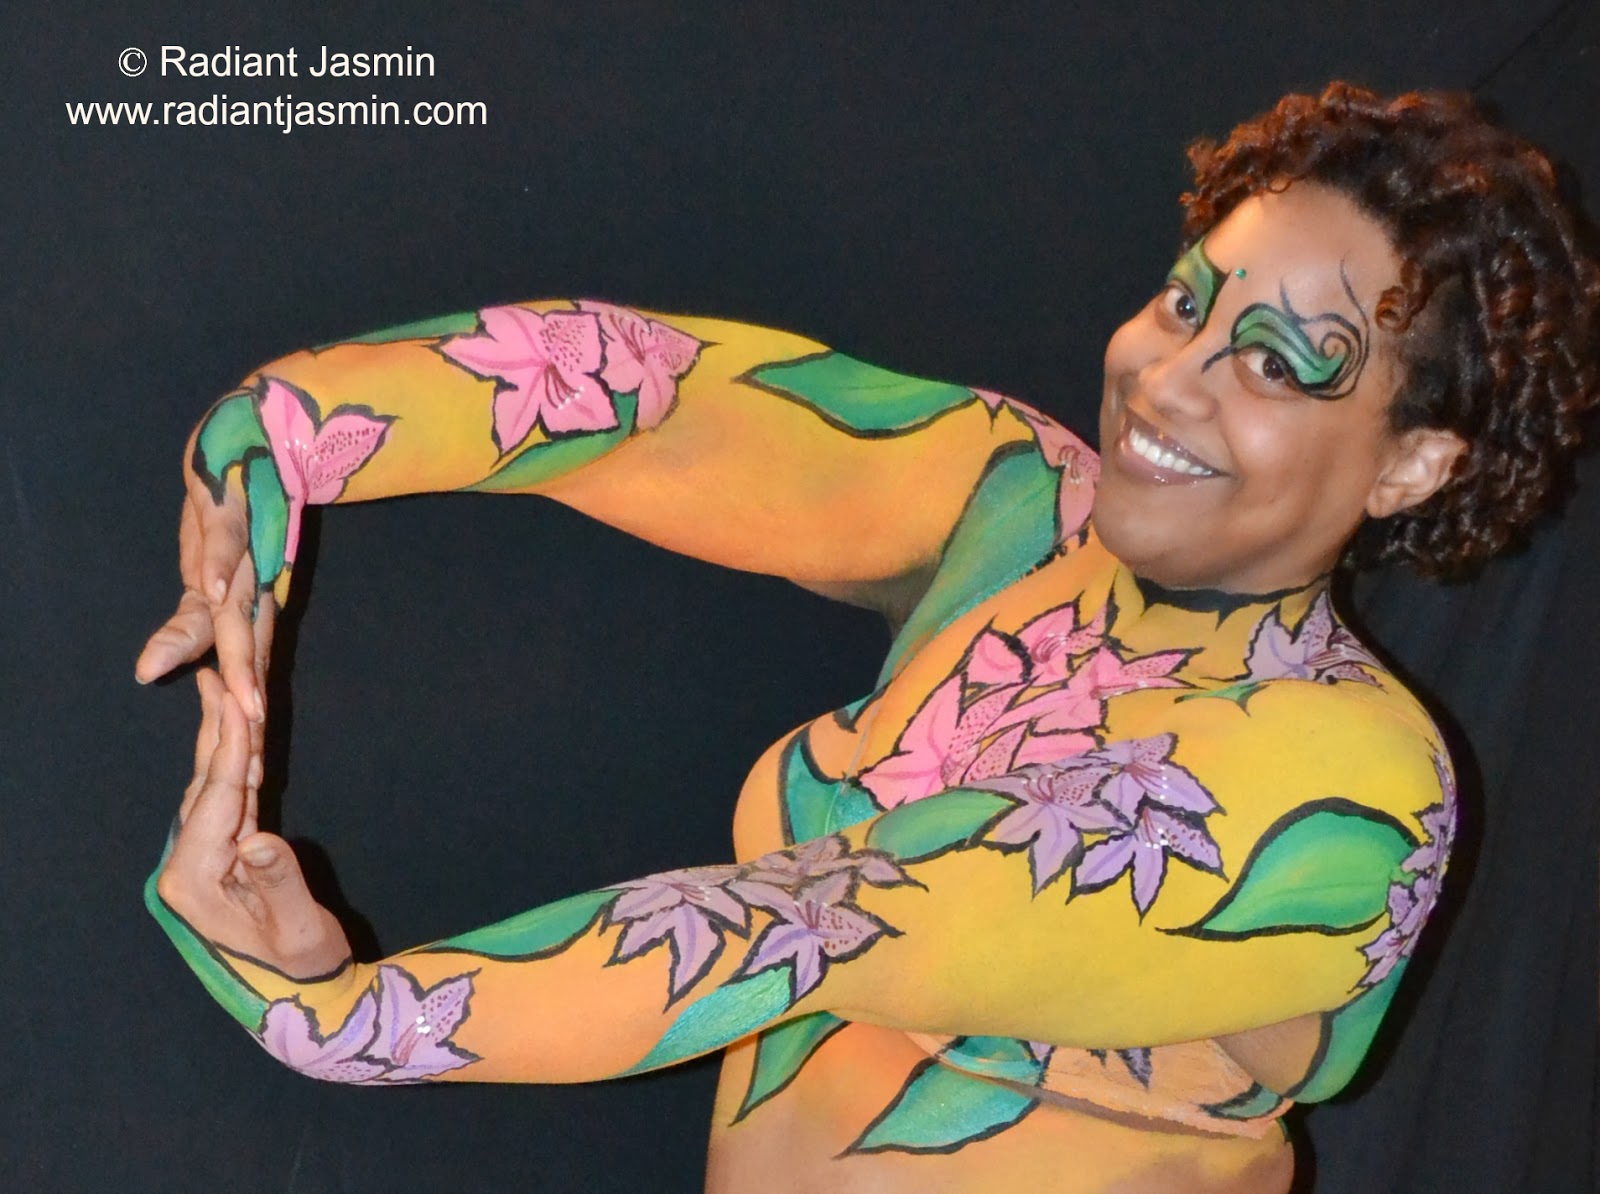 Radiant Jasmin: My Body Painting was showcased in the 